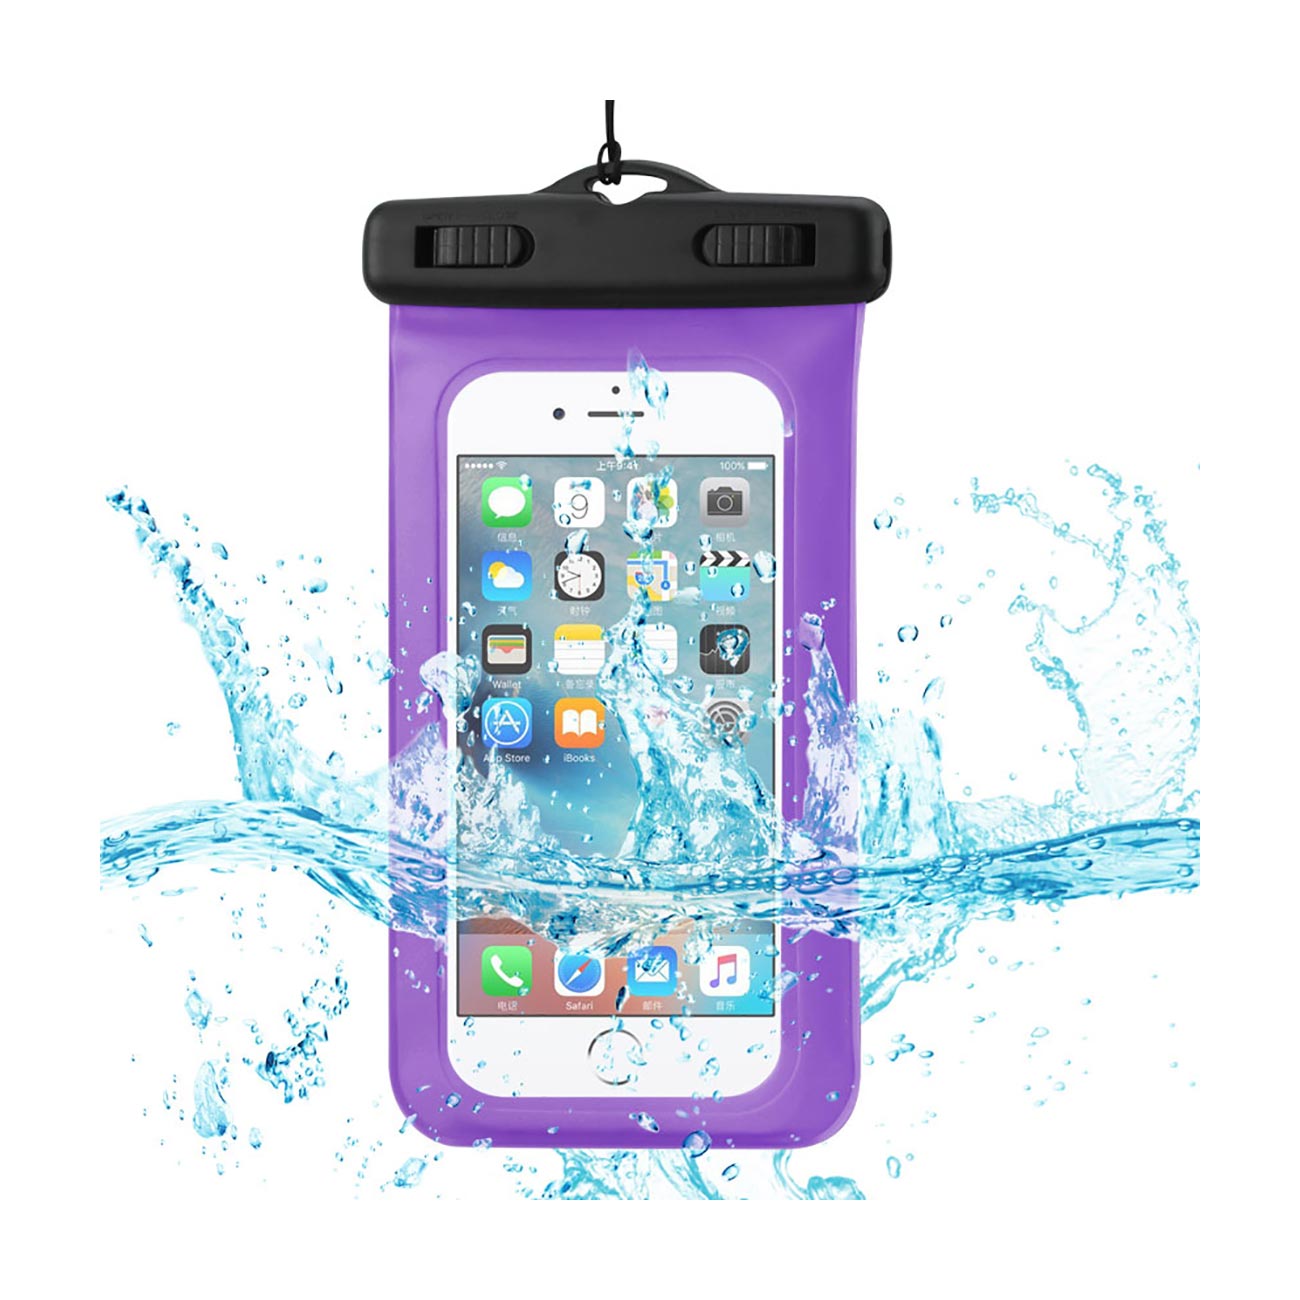 Waterproof Case With Touch Screen For 4.7X2.4X0.4 Inches Devices With Floating Adjustable Wrist Strap In Purple